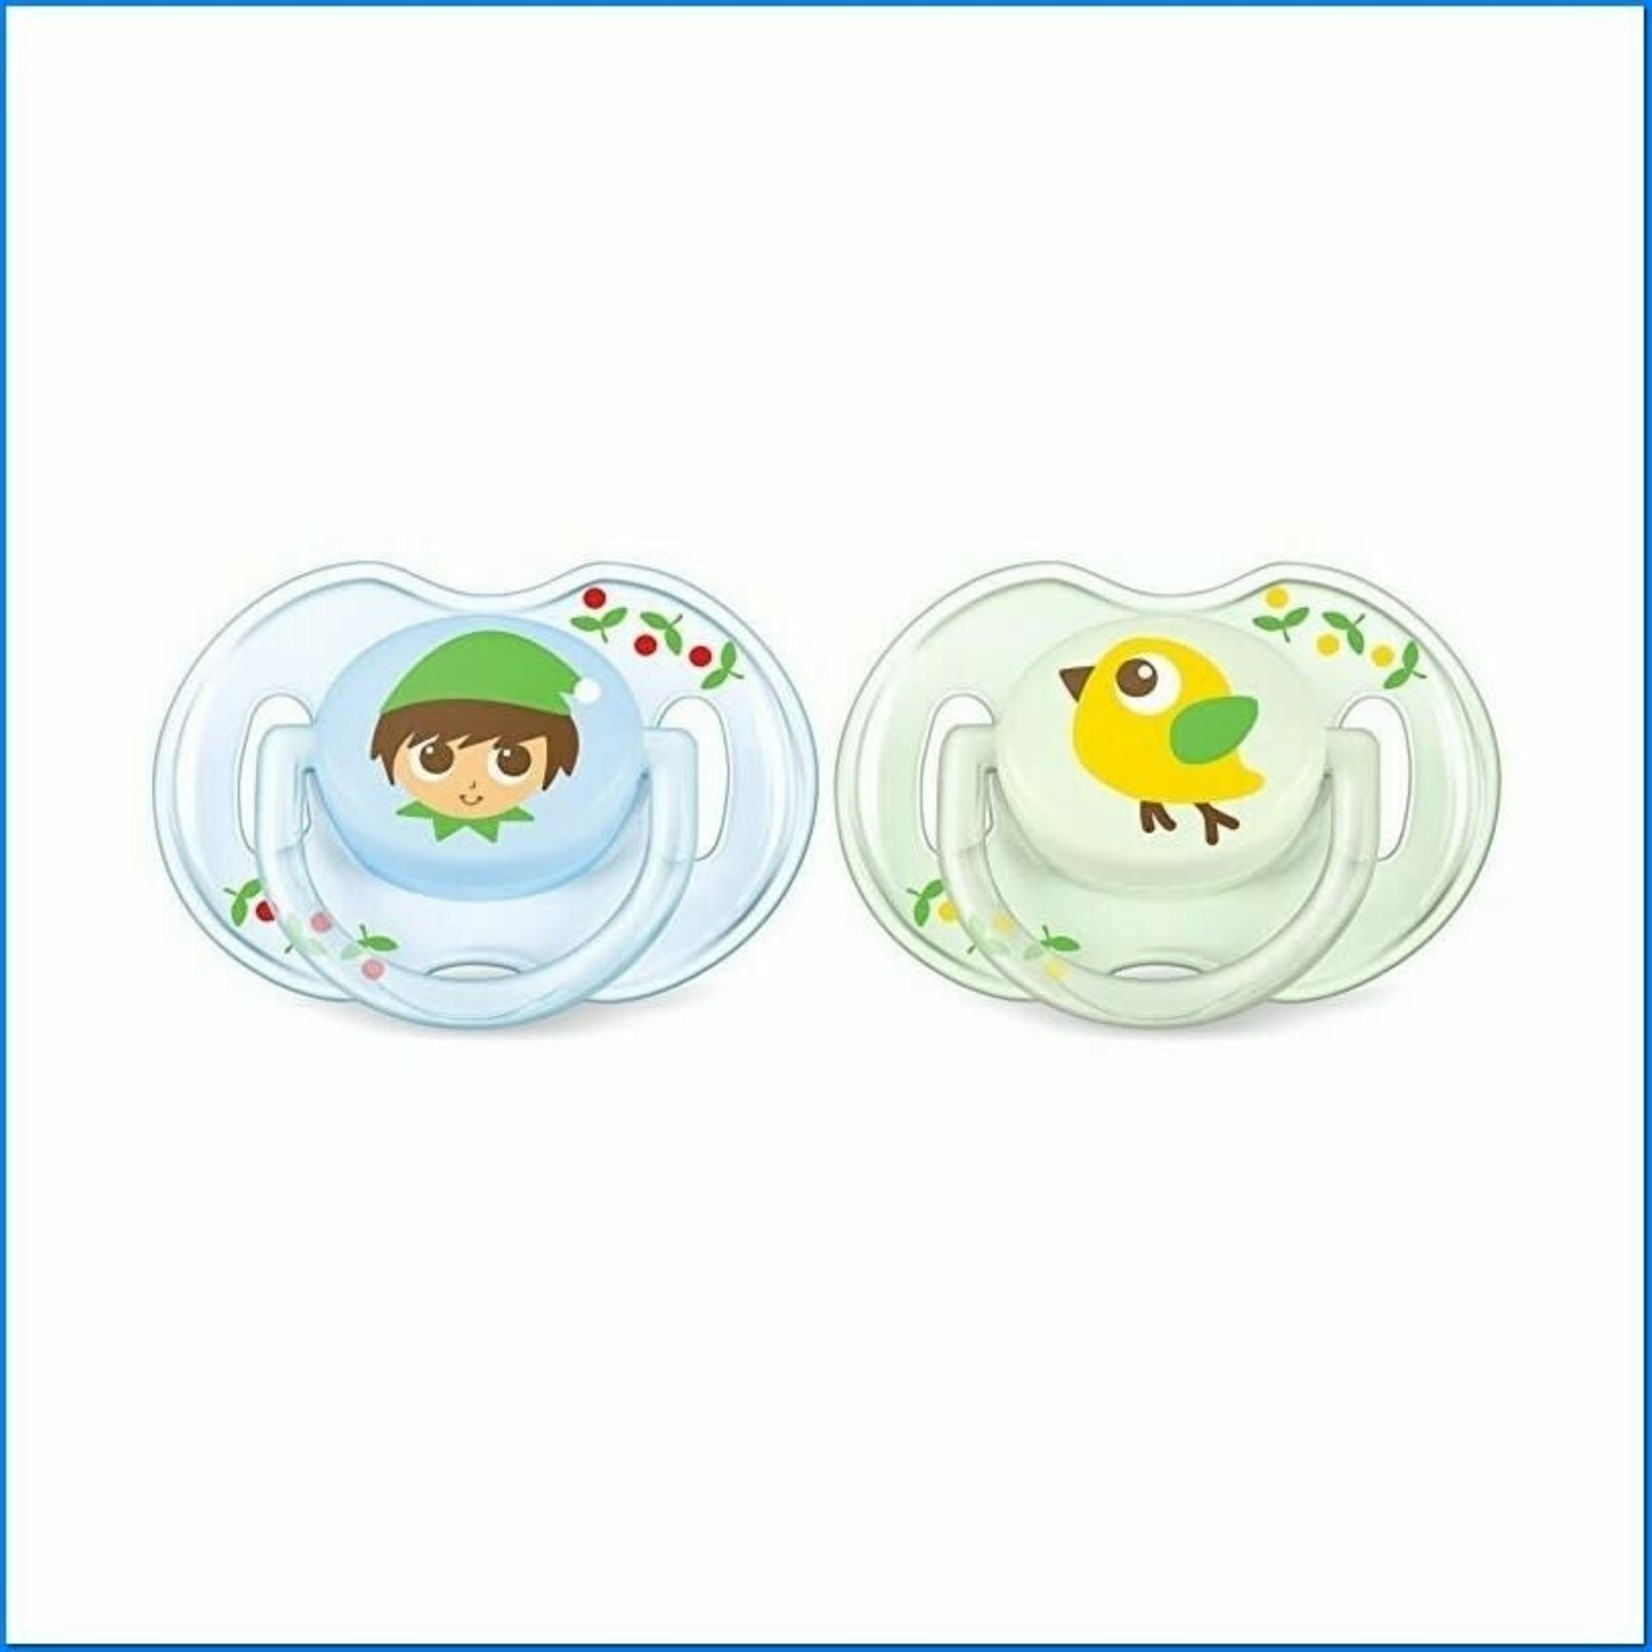 AVENT AVENT SOOTHER FAIRY GARDEN BOY 0-6M